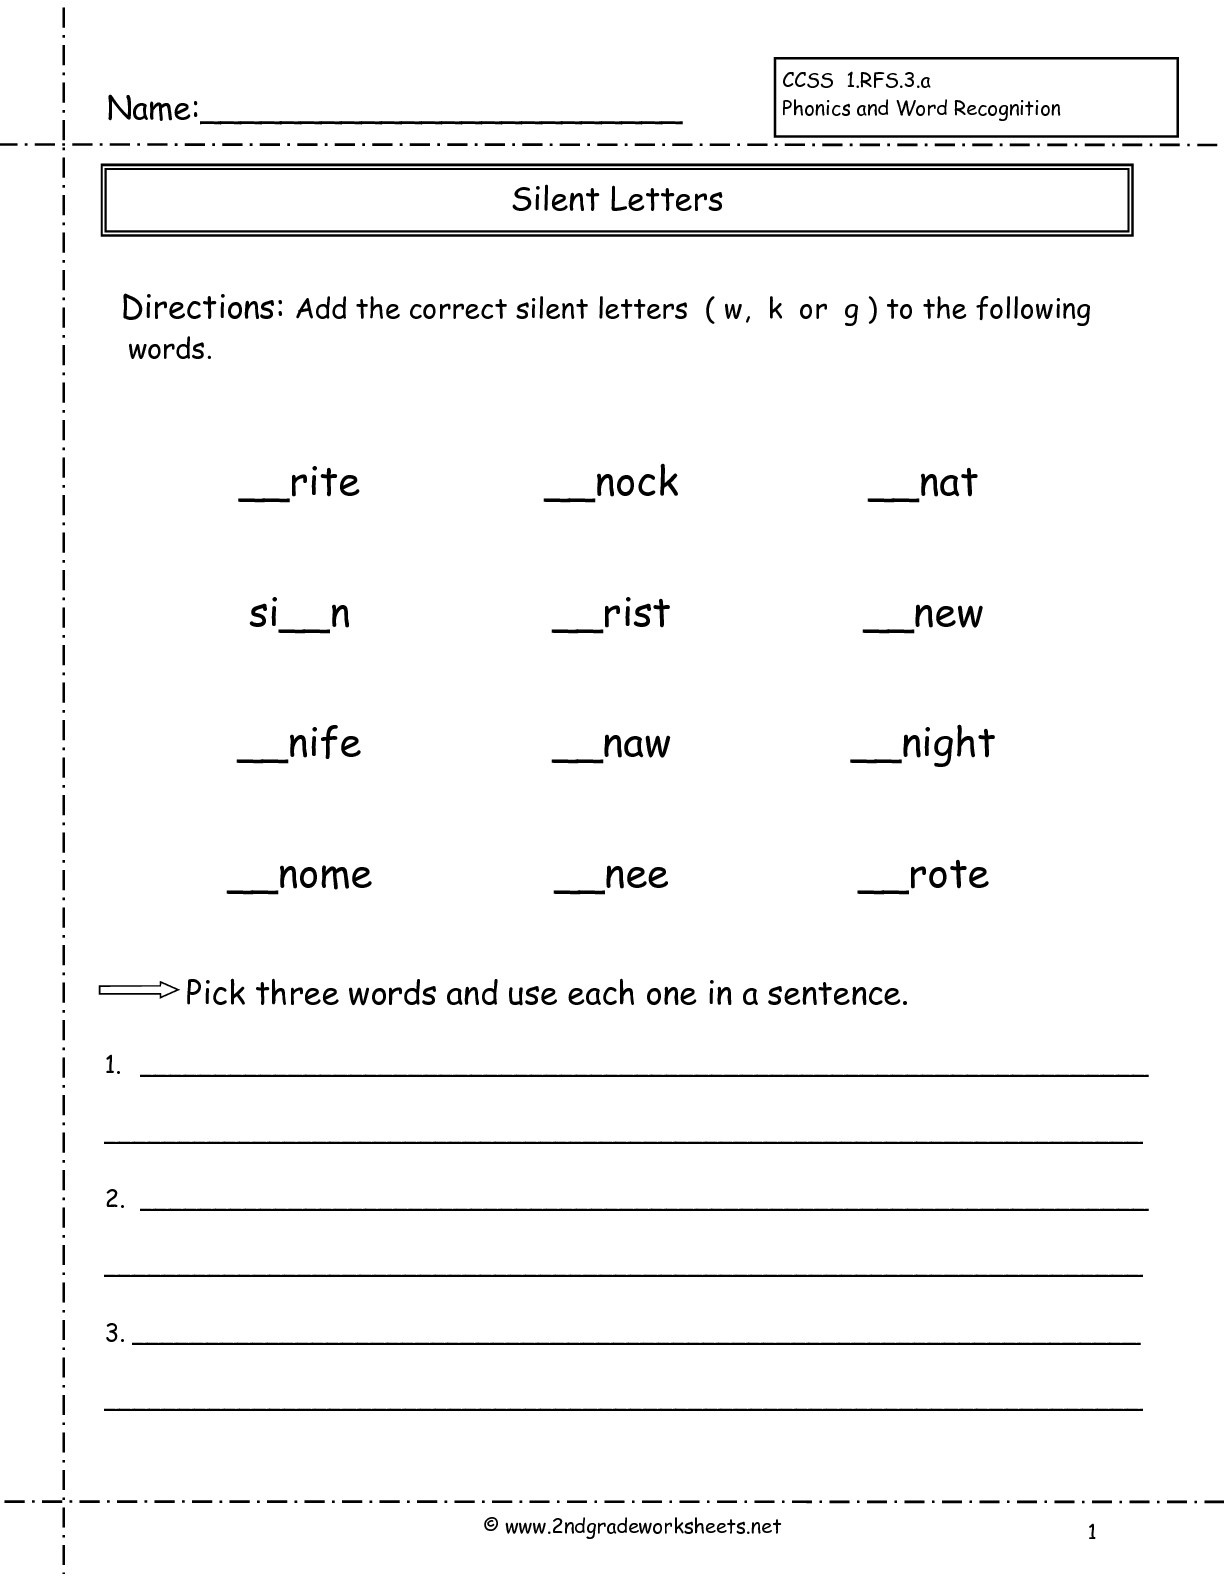 Second Grade Phonics Worksheets And Flashcards - Free Printable Phonics Worksheets For Second Grade